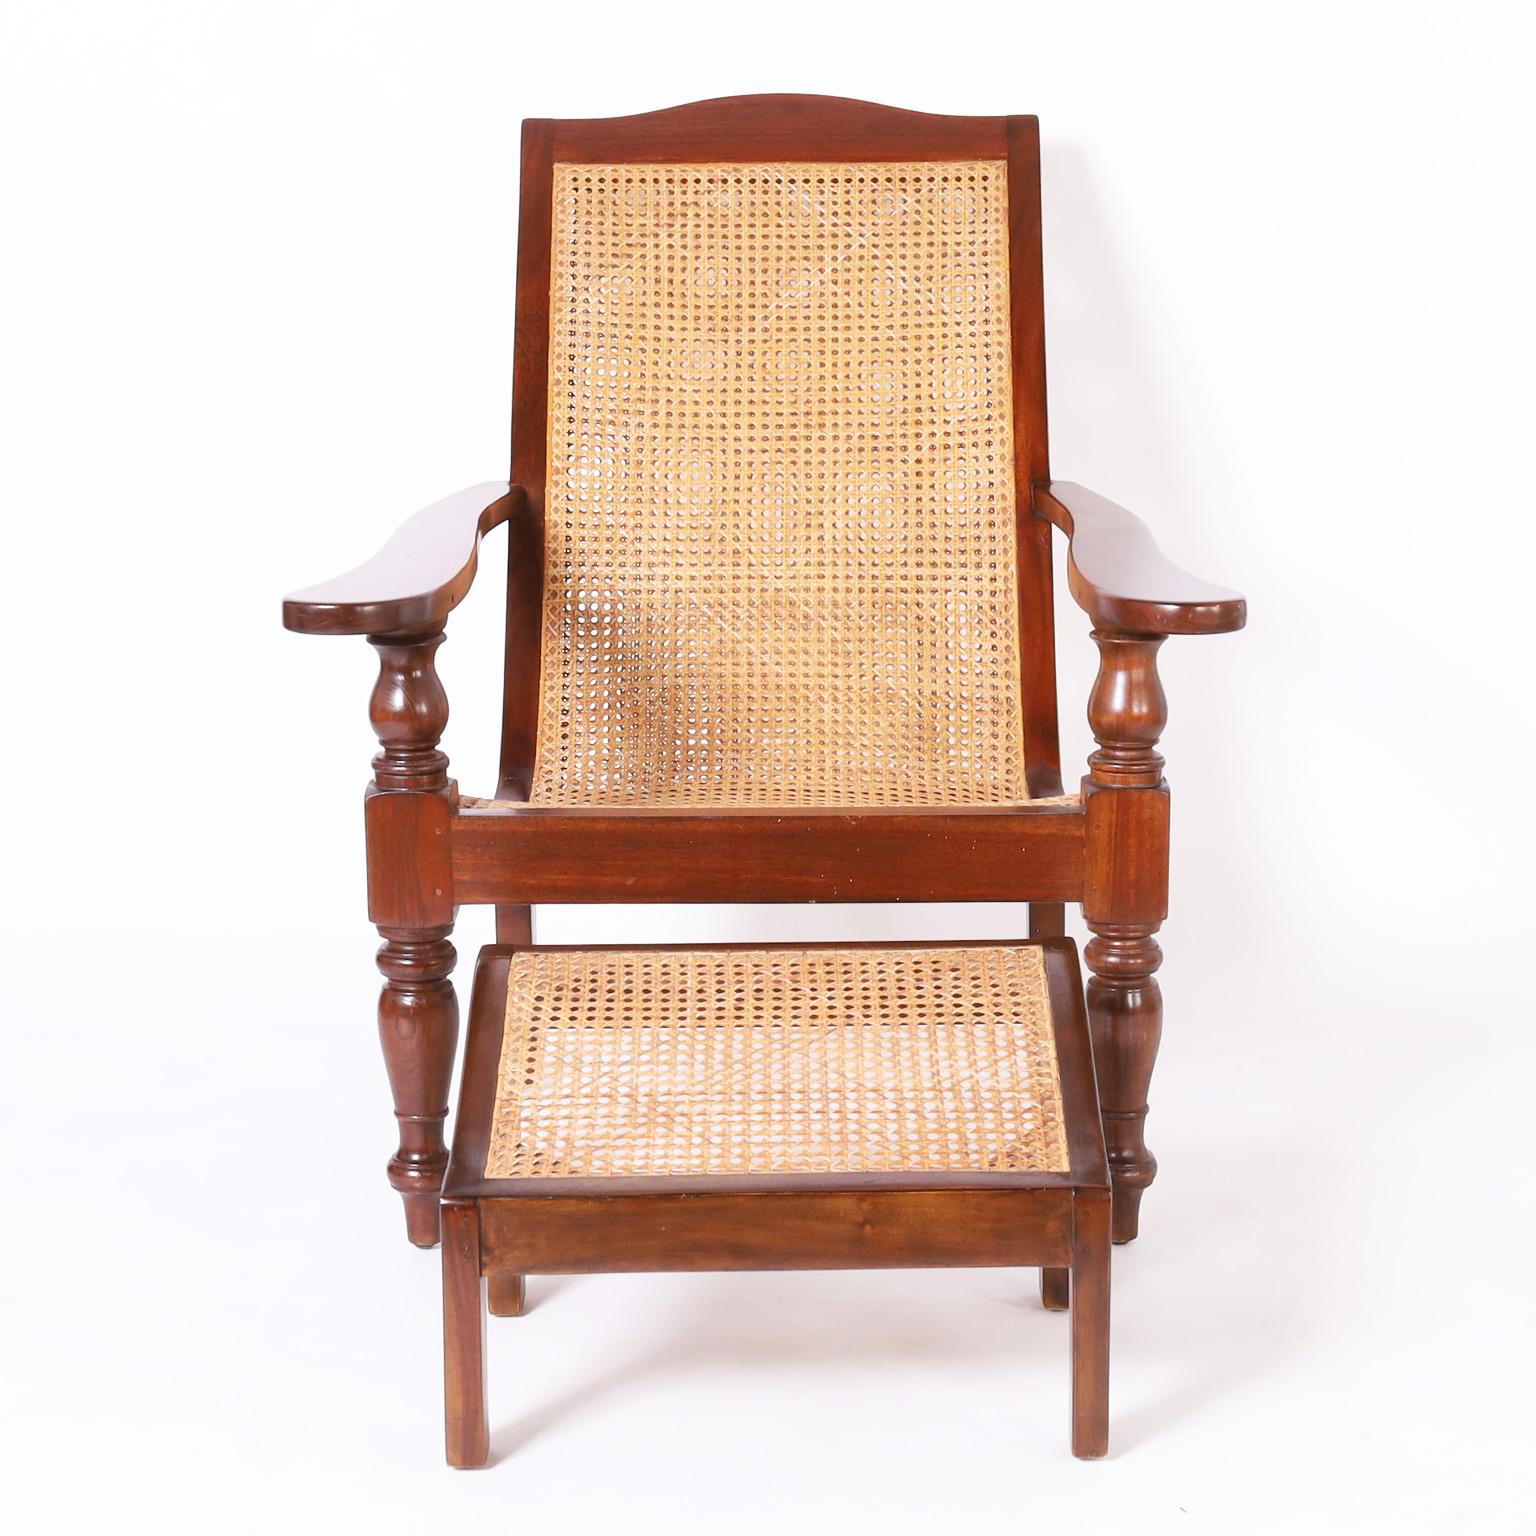 Antique British colonial plantation chair and ottoman hand crafted in mahogany with a pegged construction featuring double caned back, caned seat and ottoman, classic elegant form, and turned front supports and legs.

Ottoman measures H: 13 W: 20